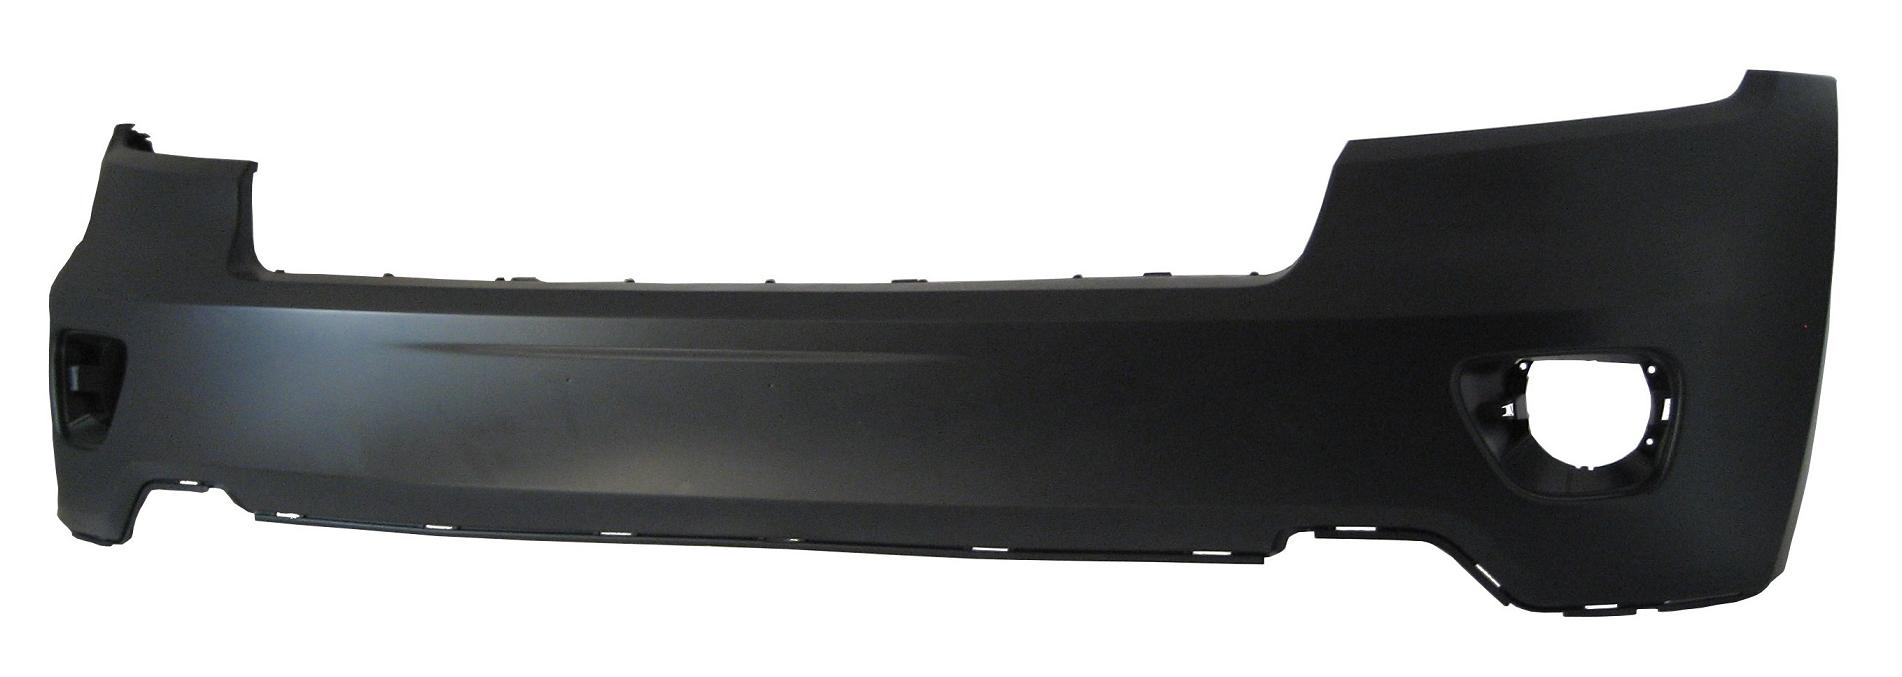 Aftermarket BUMPER COVERS for JEEP - GRAND CHEROKEE, GRAND CHEROKEE,11-13,Front bumper cover